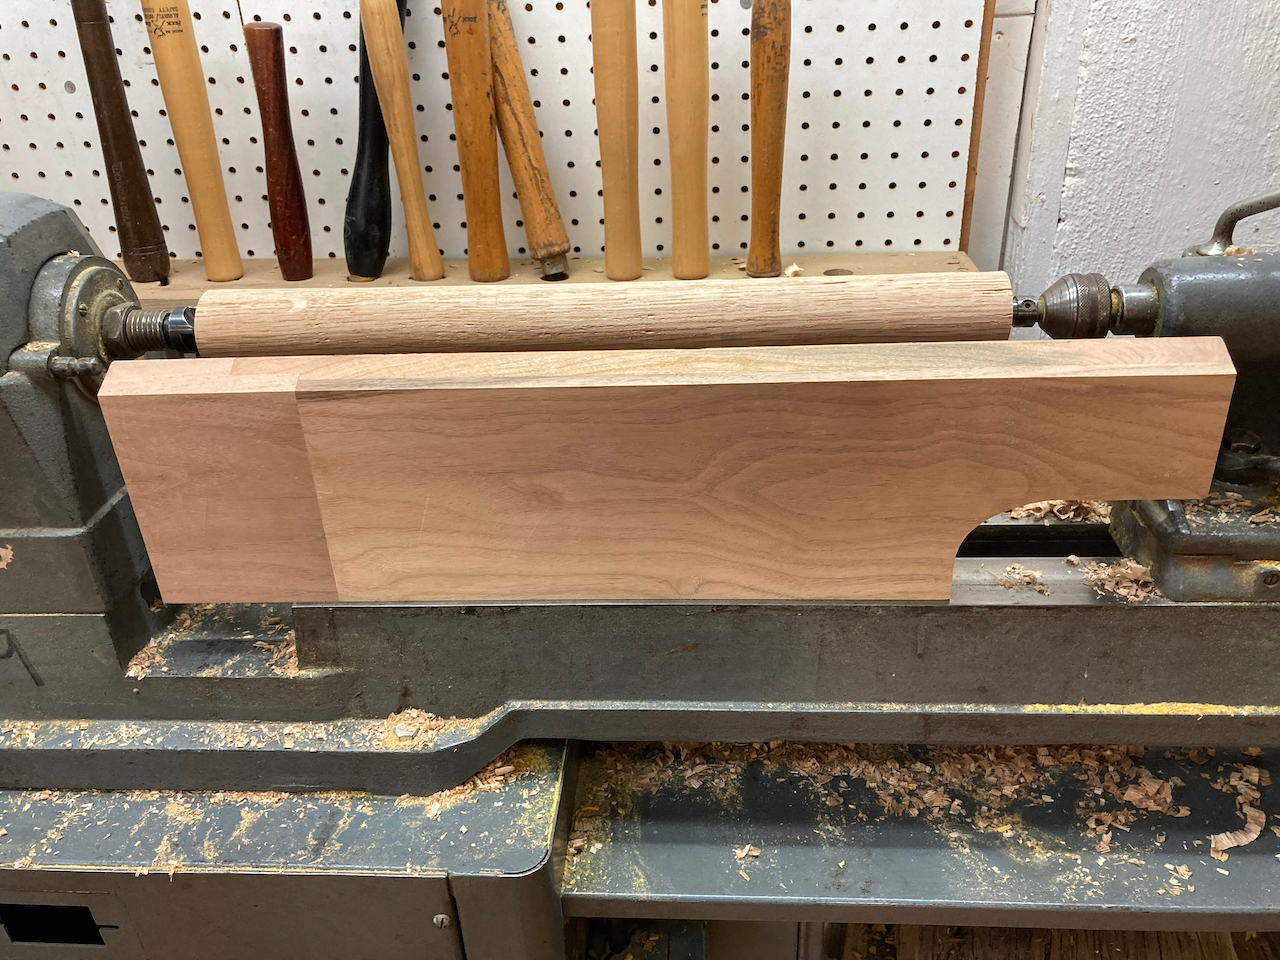 Wooden lathe tool rest